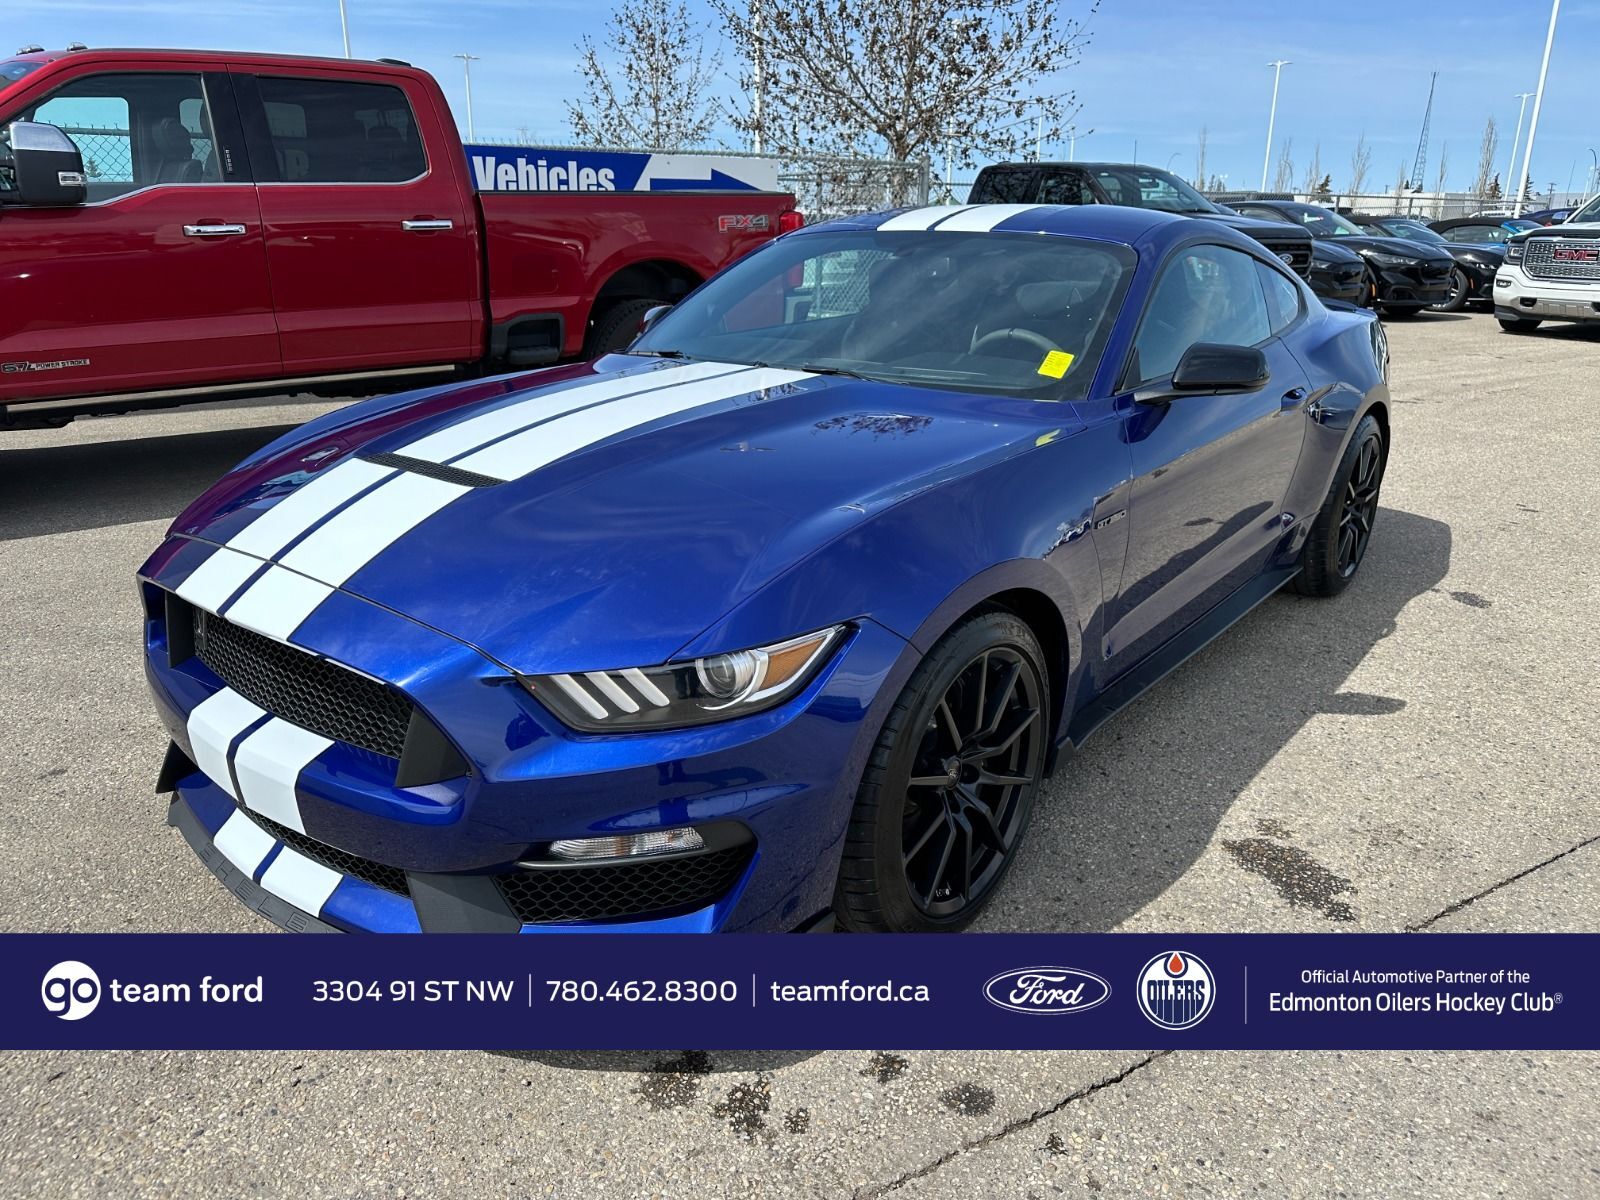 2016 Ford Mustang 5.2L V8 ENG, 6 SPEED MANUAL, SHELBY GT350, REVERSE